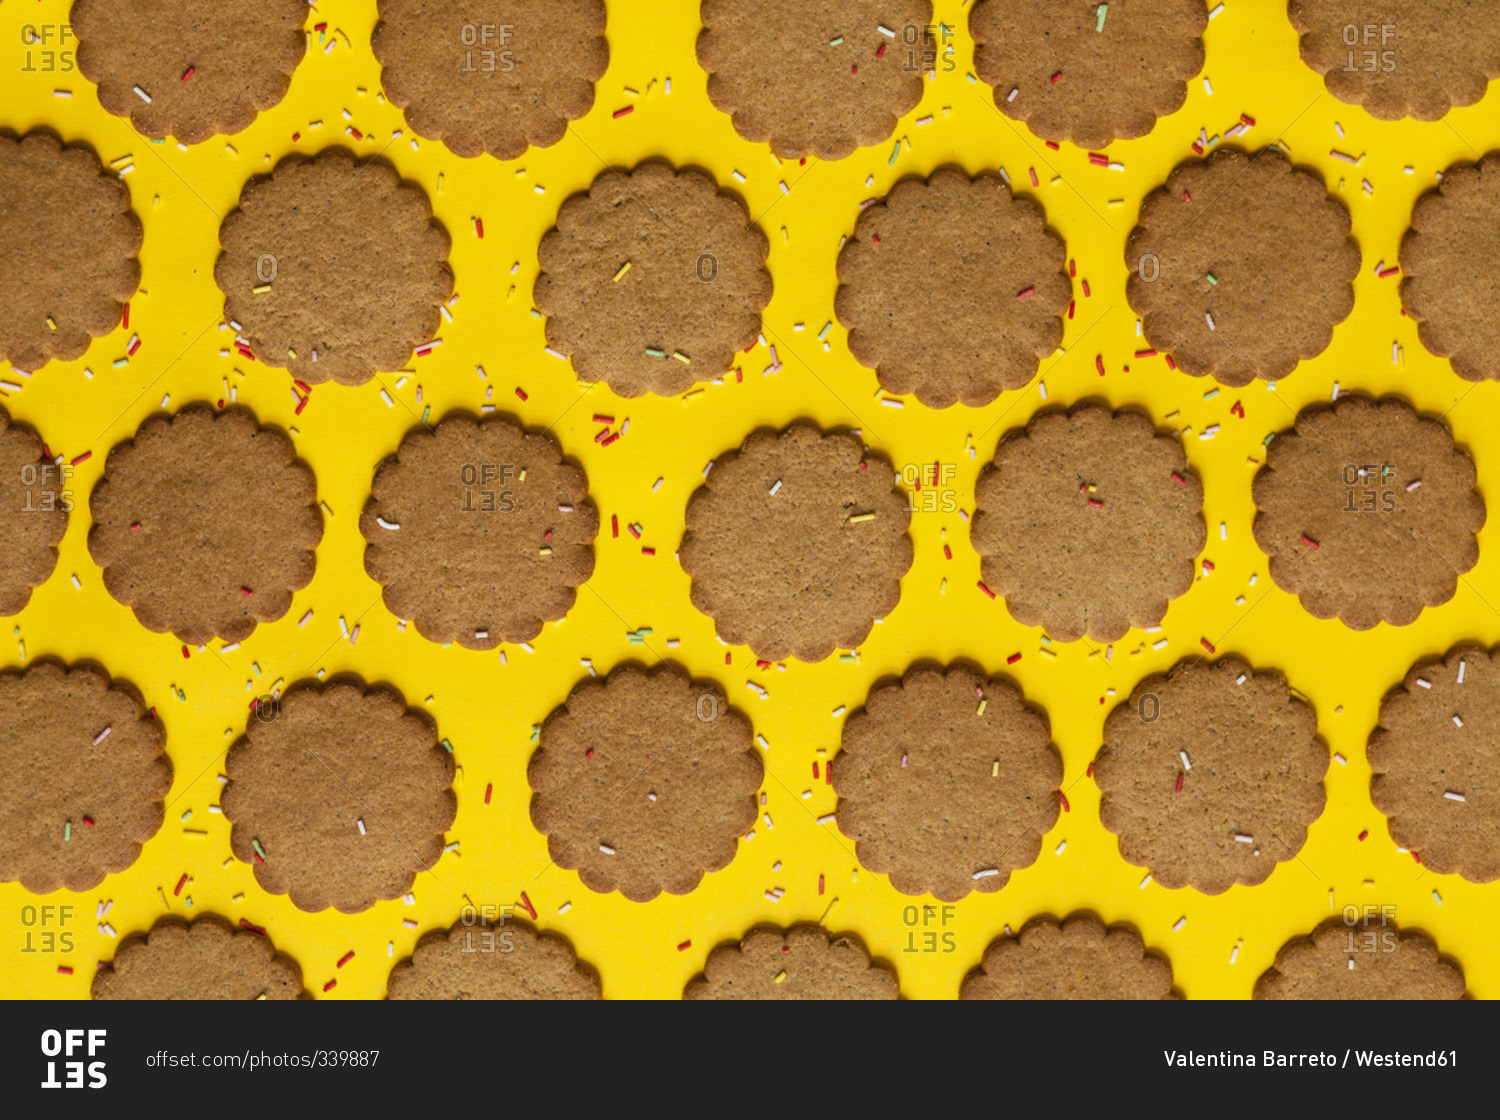 Rows of ginger cookies sprinkled with sugar granules on yellow background